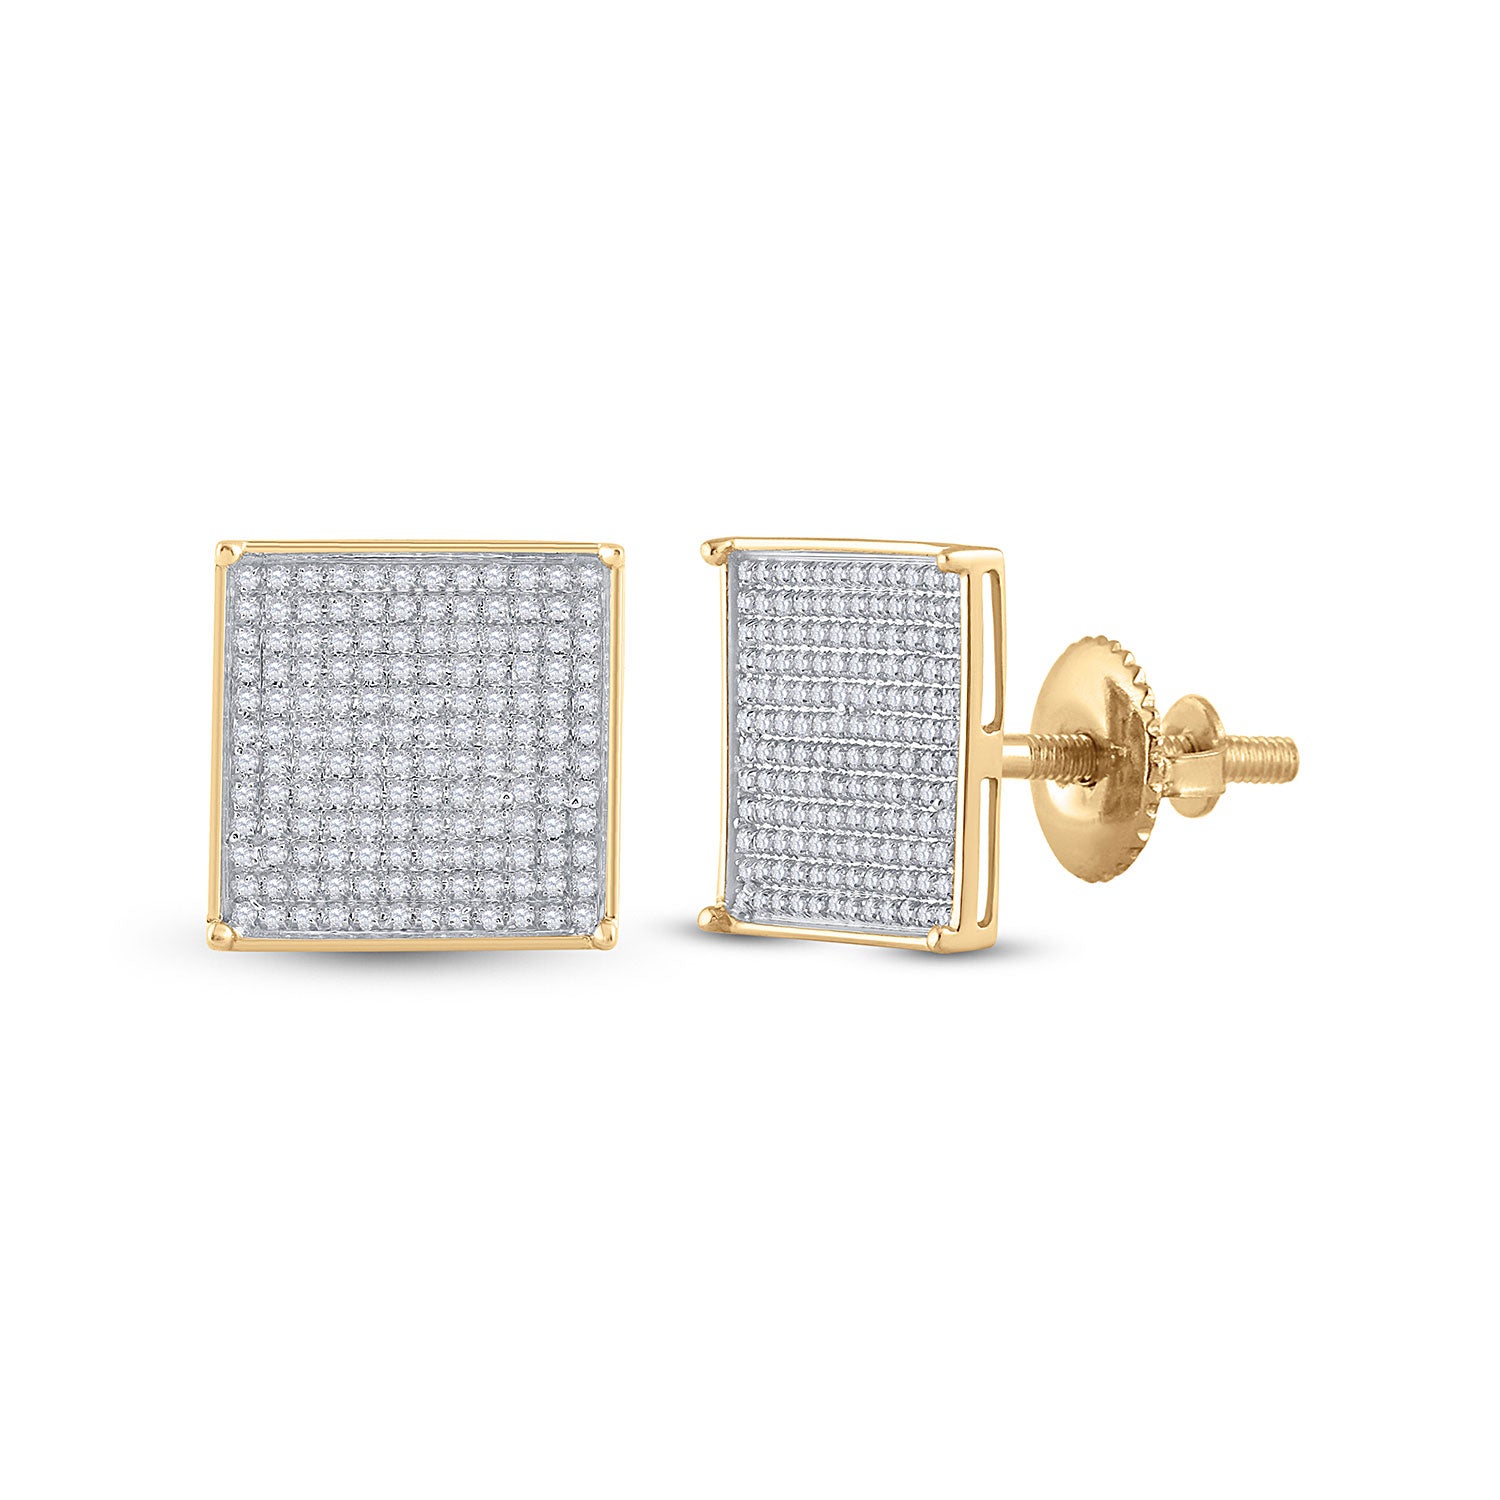 10kt Yellow Gold Womens Round Diamond Square Earrings 7/8 Cttw